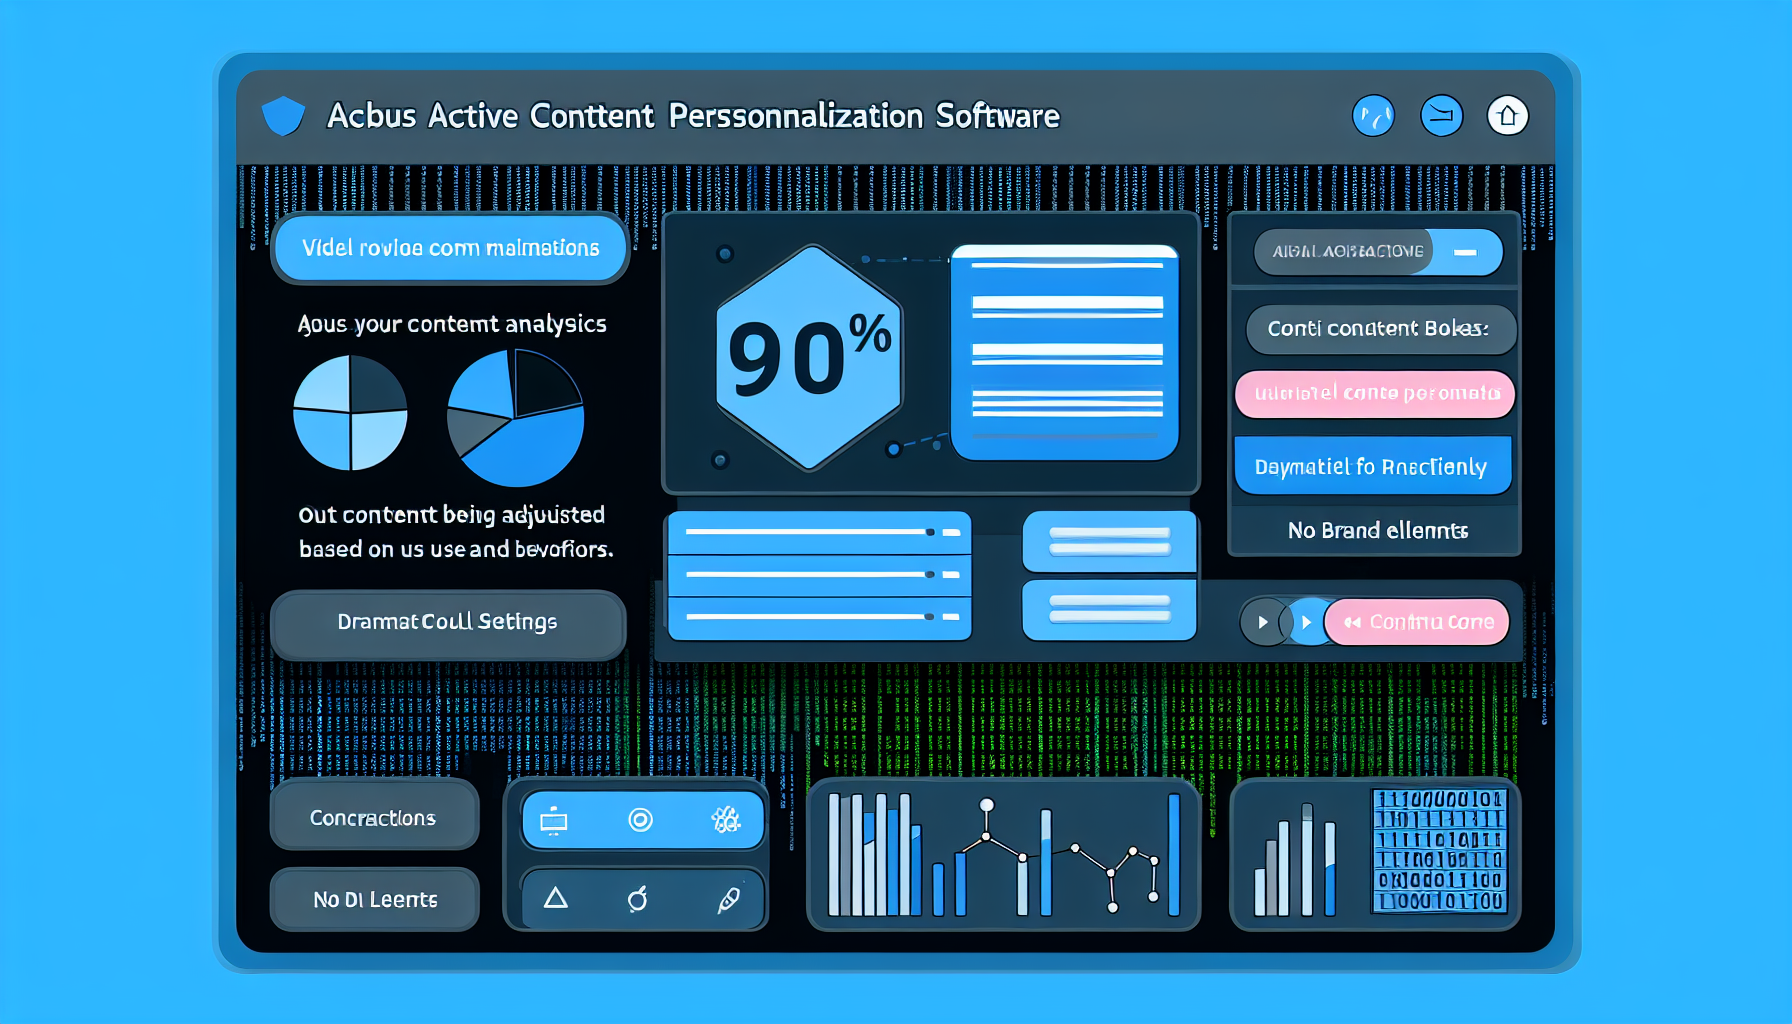 Screenshot of content personalization software in action